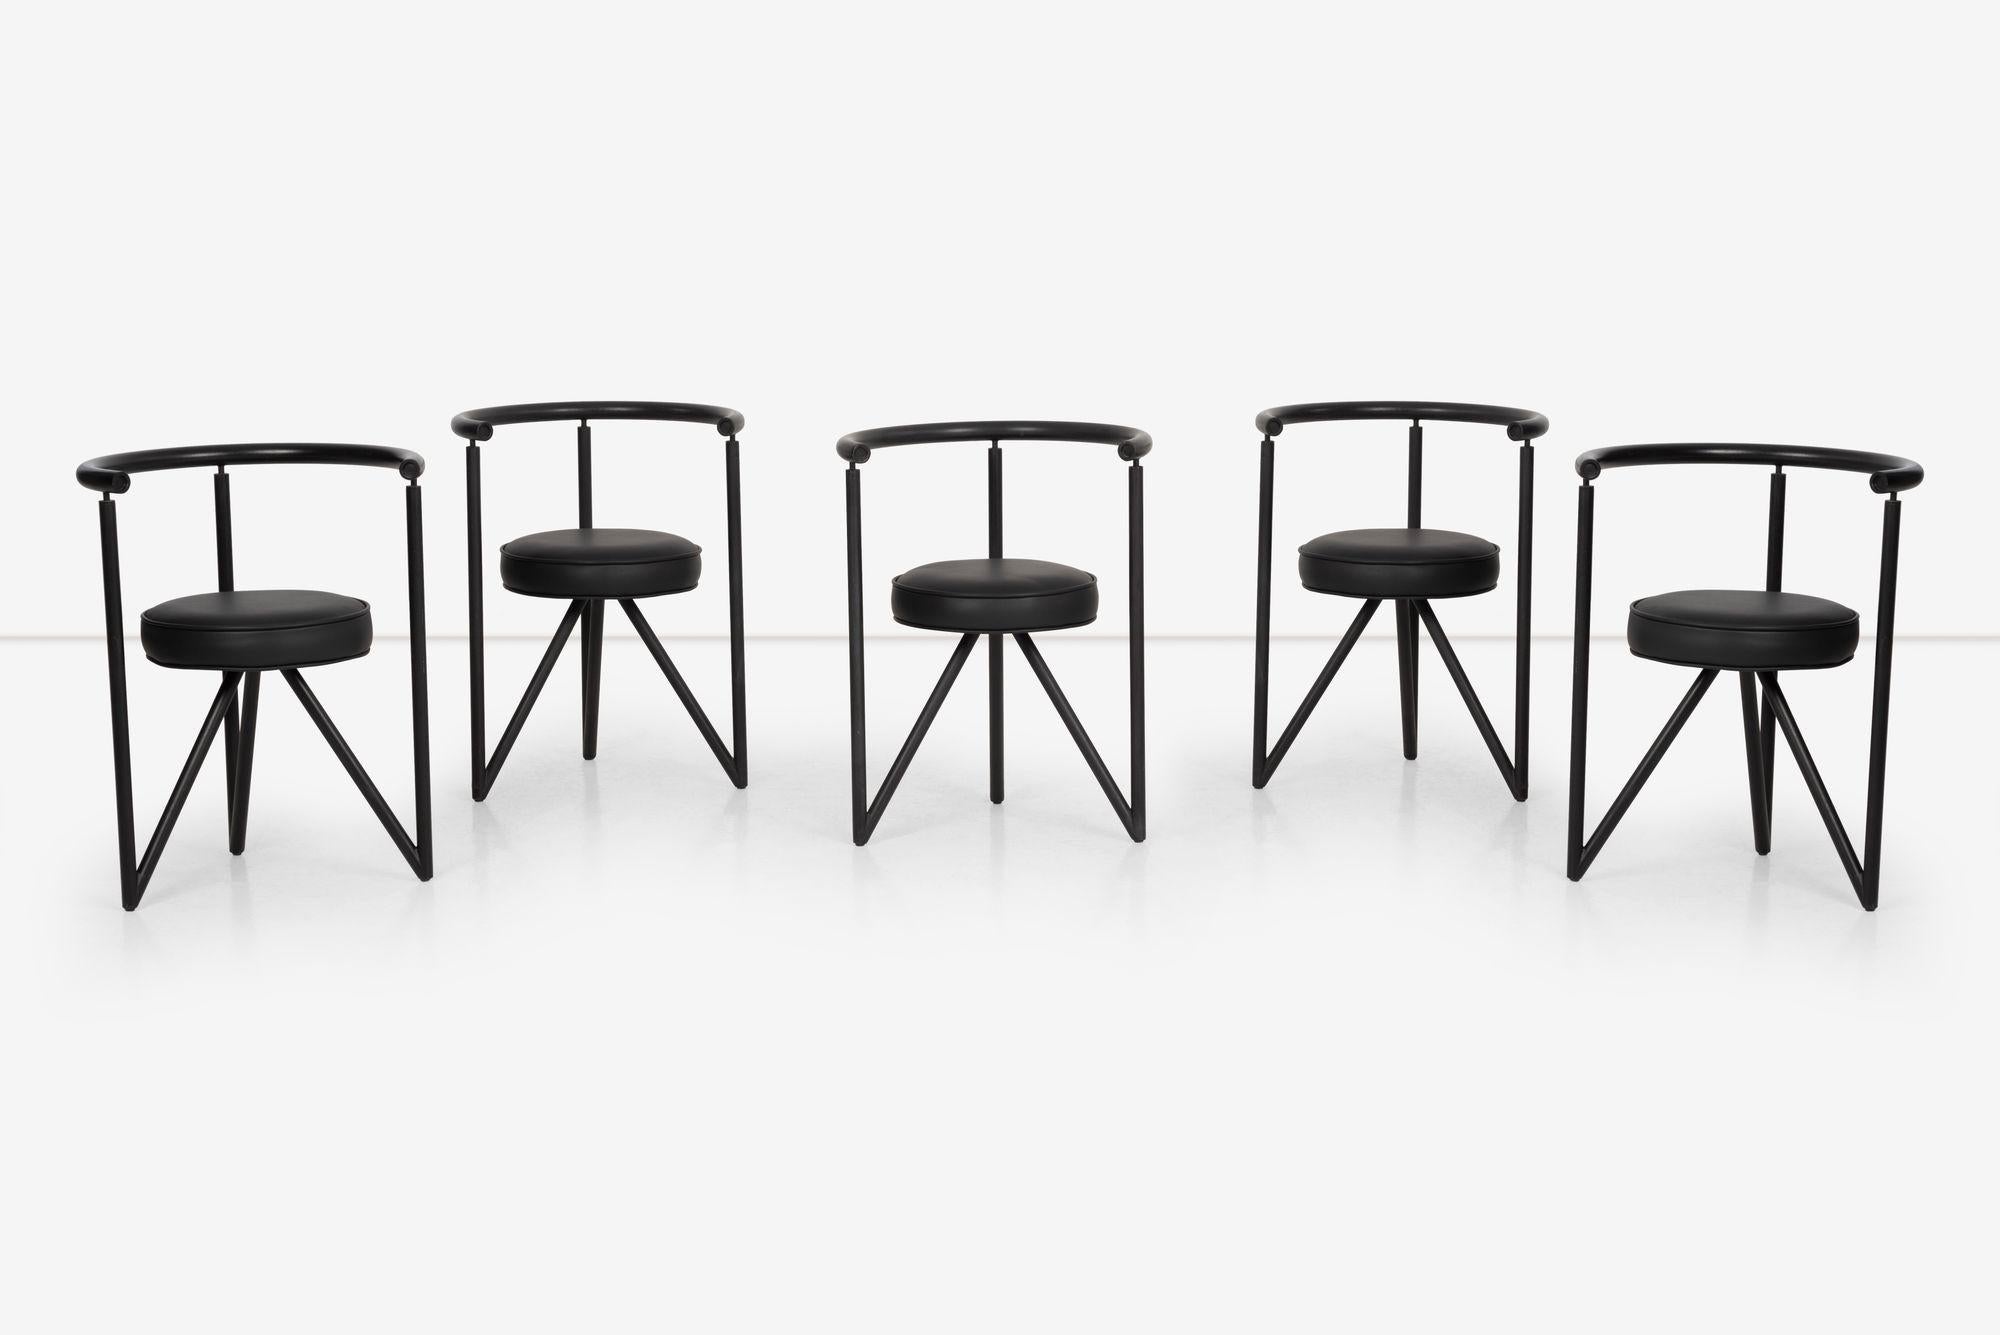 Post-Modern Philippe Starck Miss Dorn Chairs, set of Five by Disform, Spain 1982